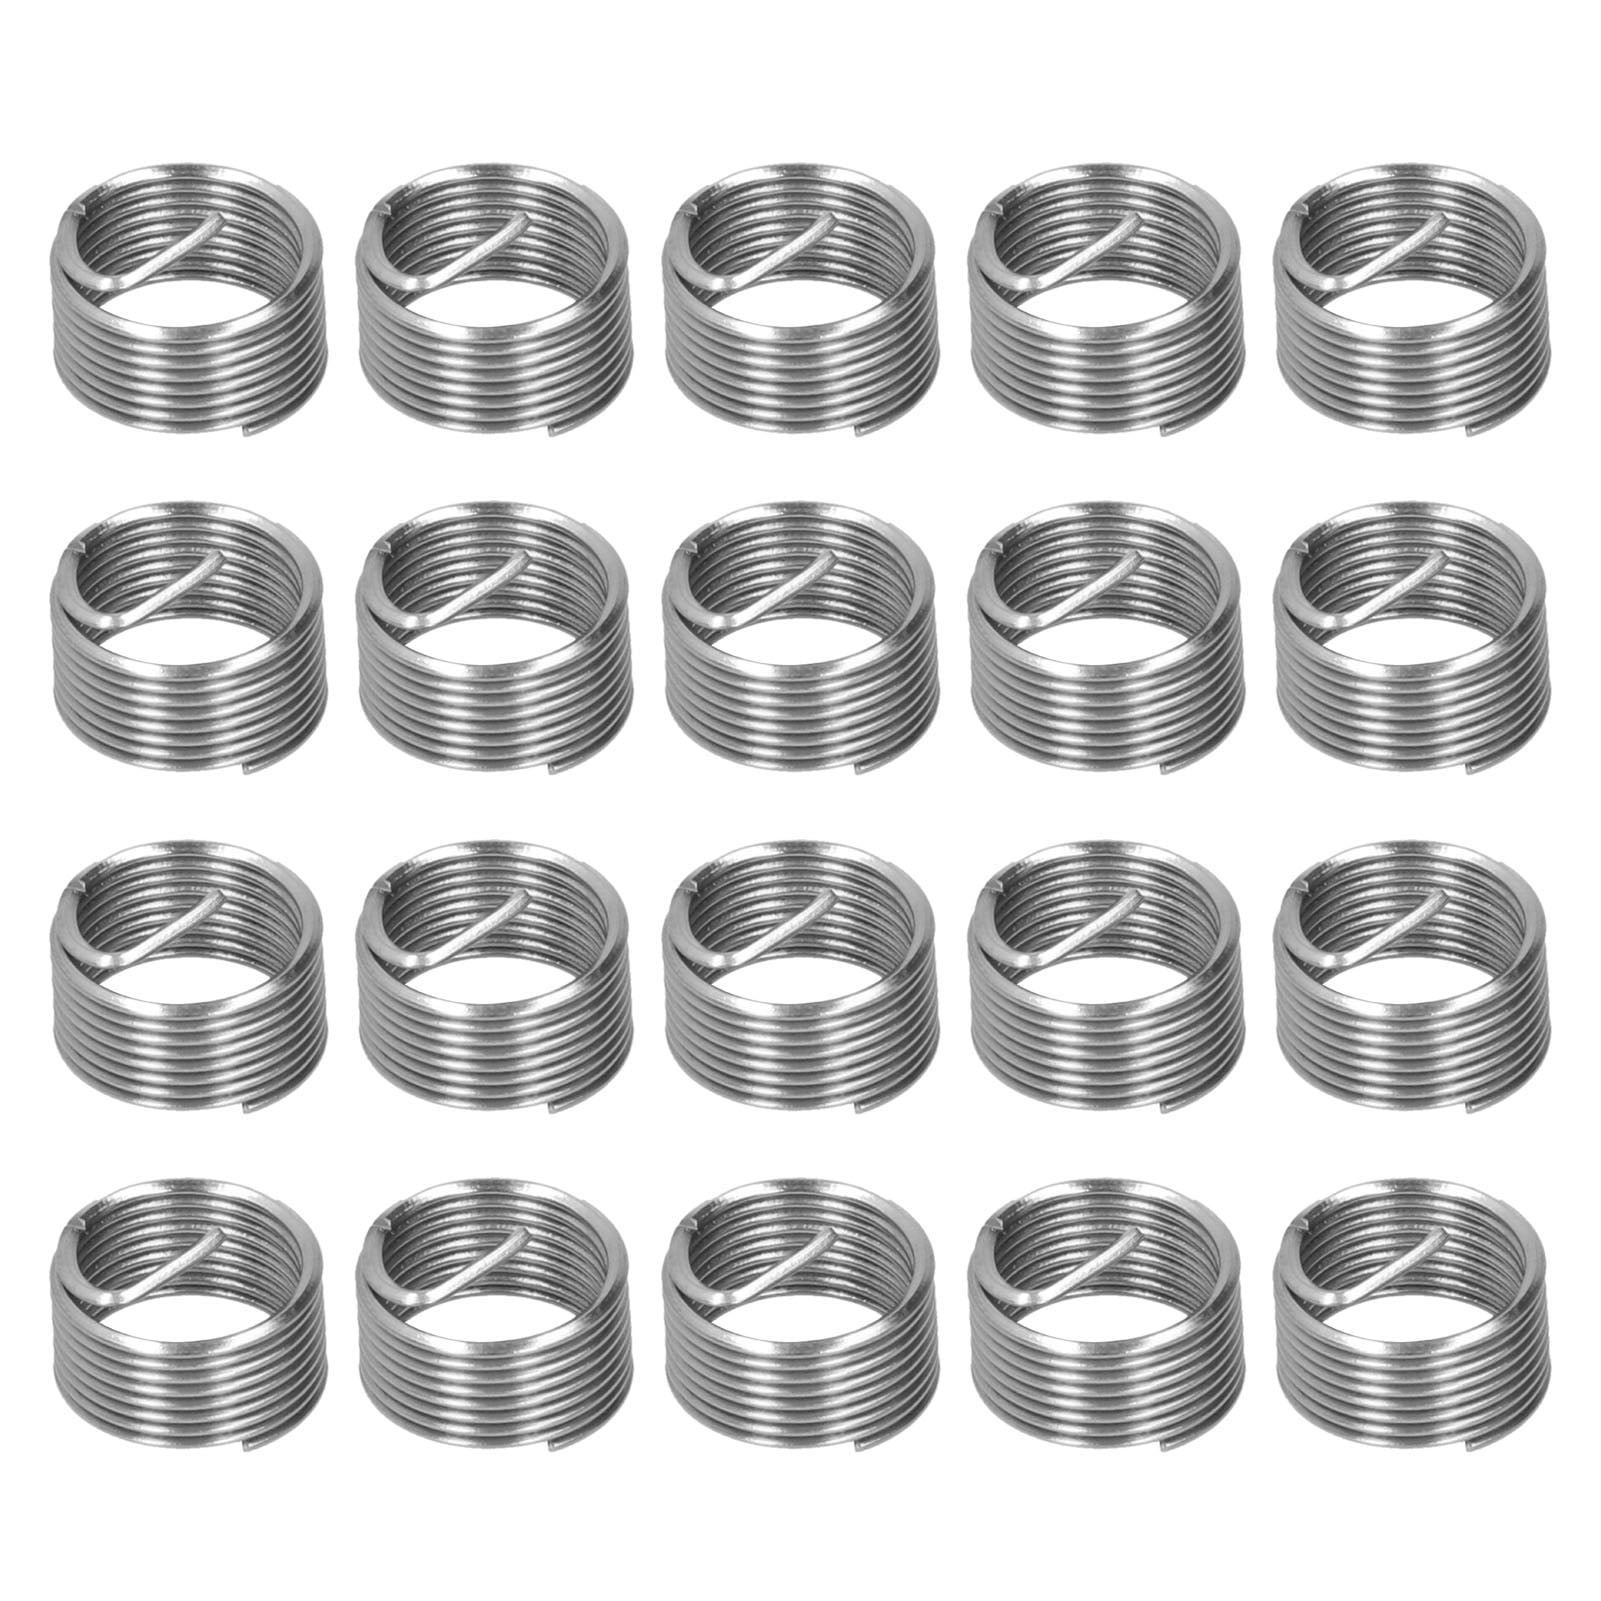 14mm M14 x 1.25 Helicoil Metric Thread Sleeves 20 PCS Thread Repair Insert Stainless Steel Wire Thread Sheaths with Different Length to Choose for Thread Repair 